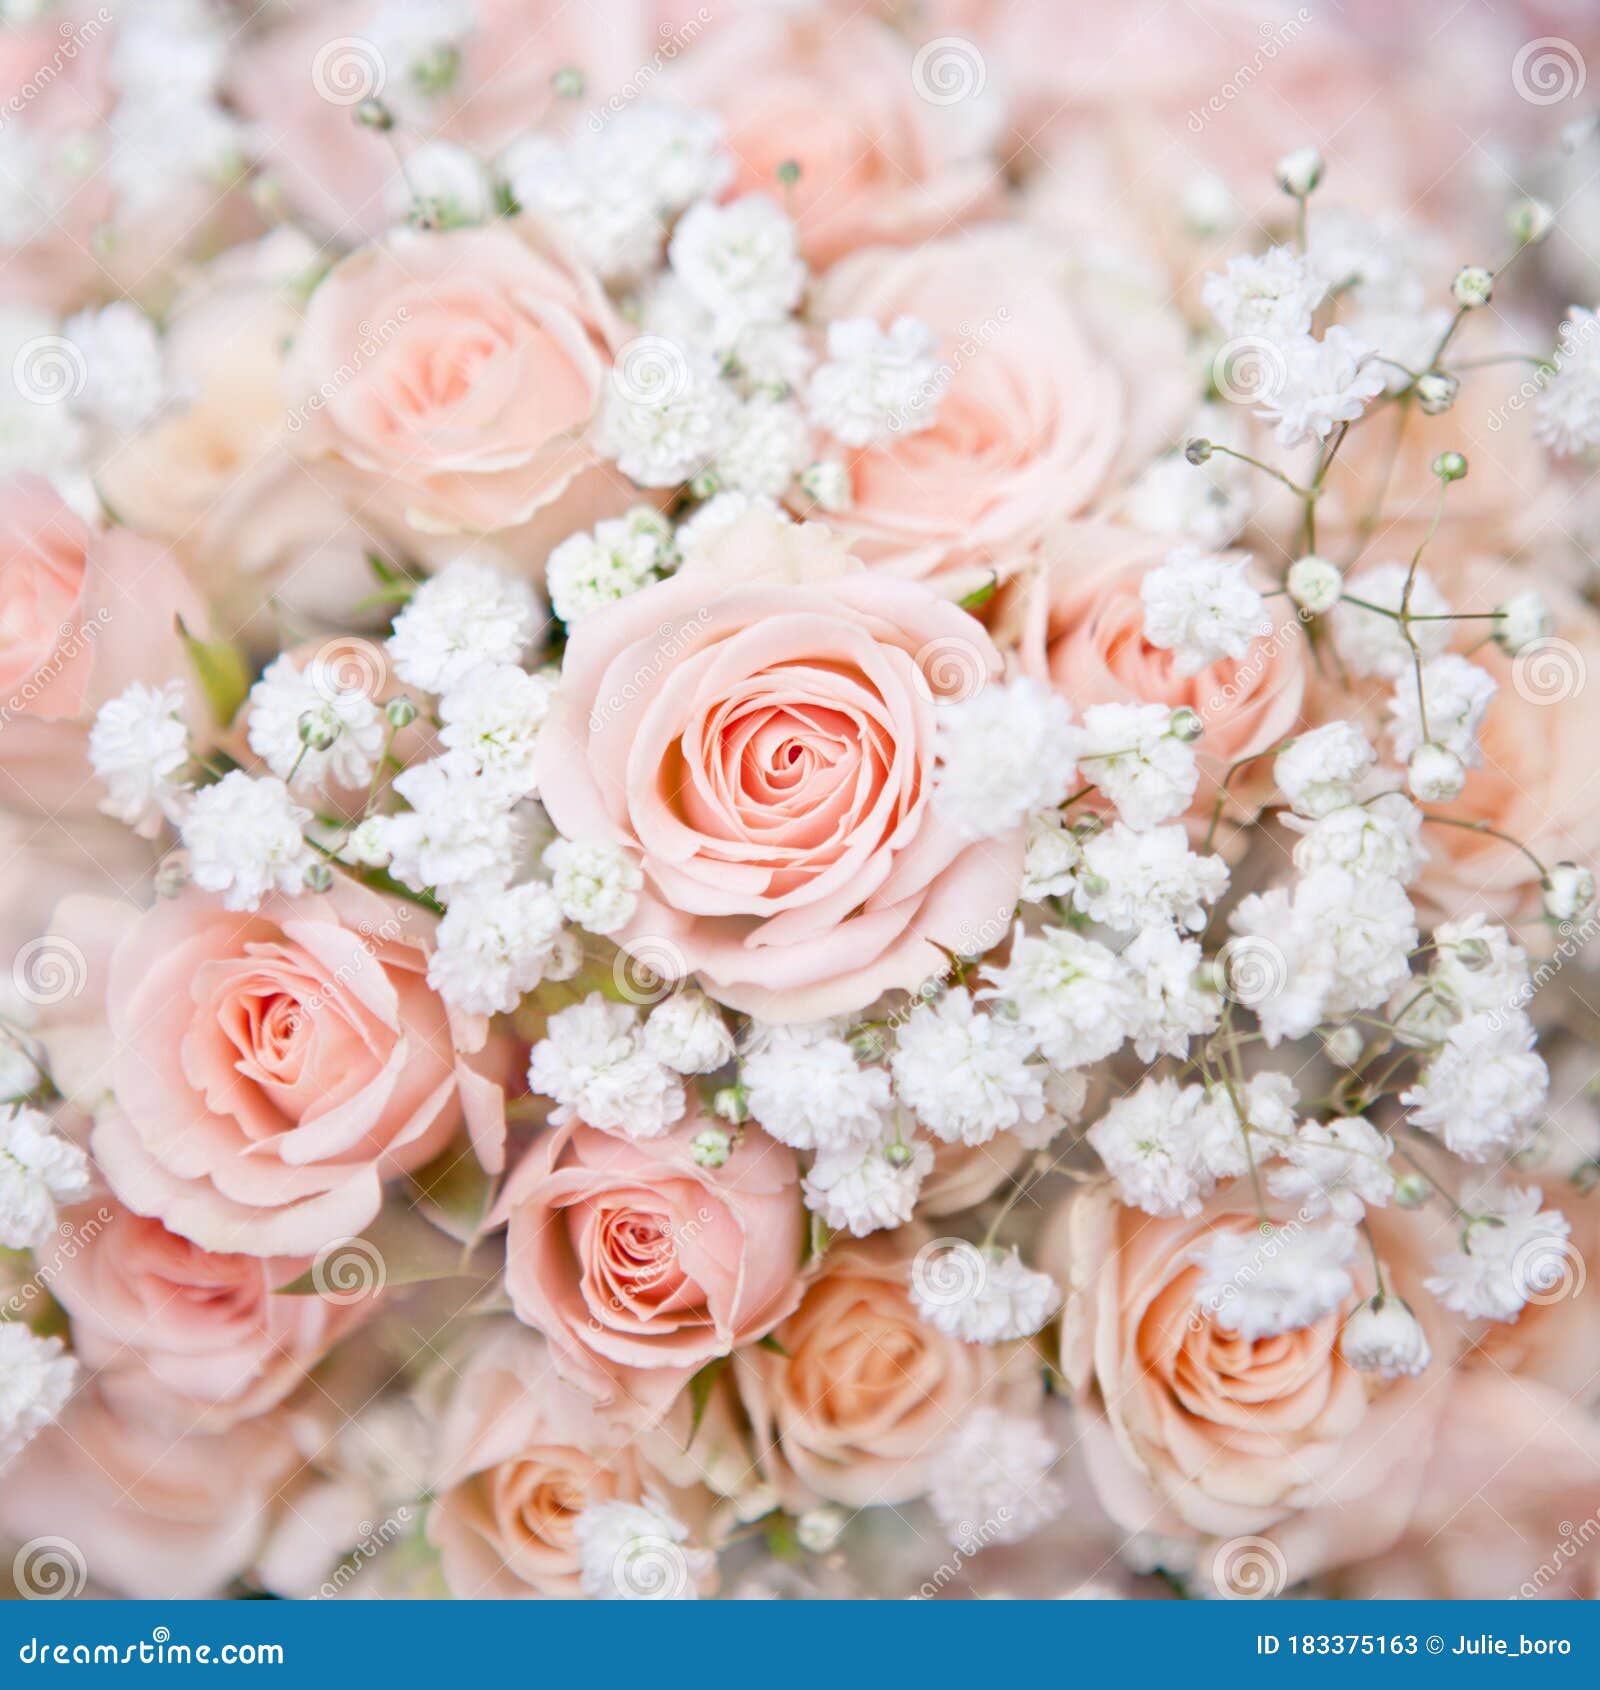 1,251 Pink Glitter Roses Stock Photos - Free & Royalty-Free Stock Photos  from Dreamstime